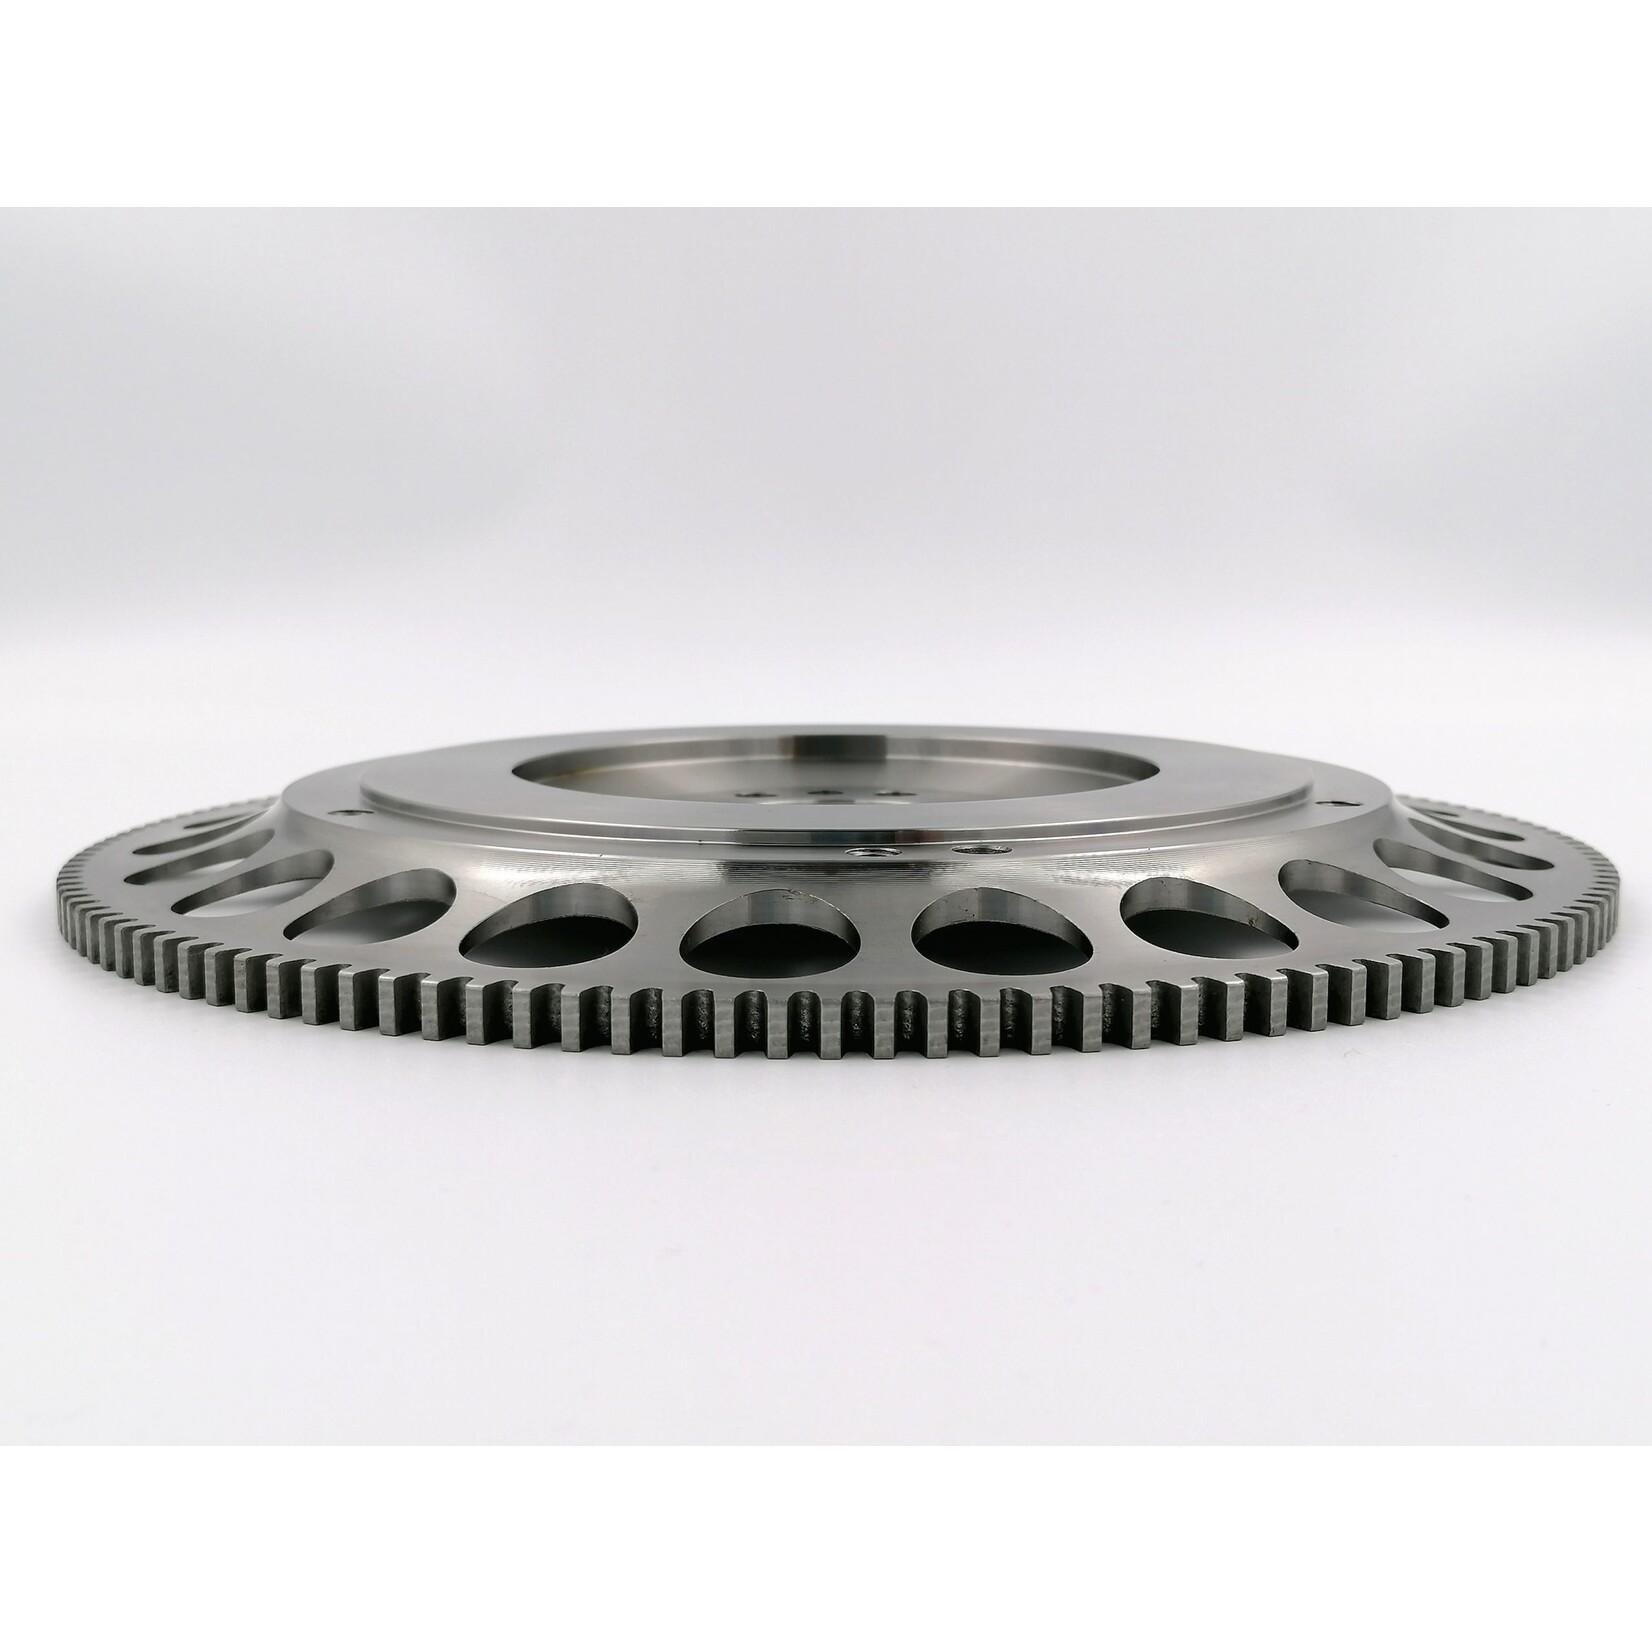 TTV Racing XU racing flywheel for 184mm clutches without trigger pattern 2.8KG